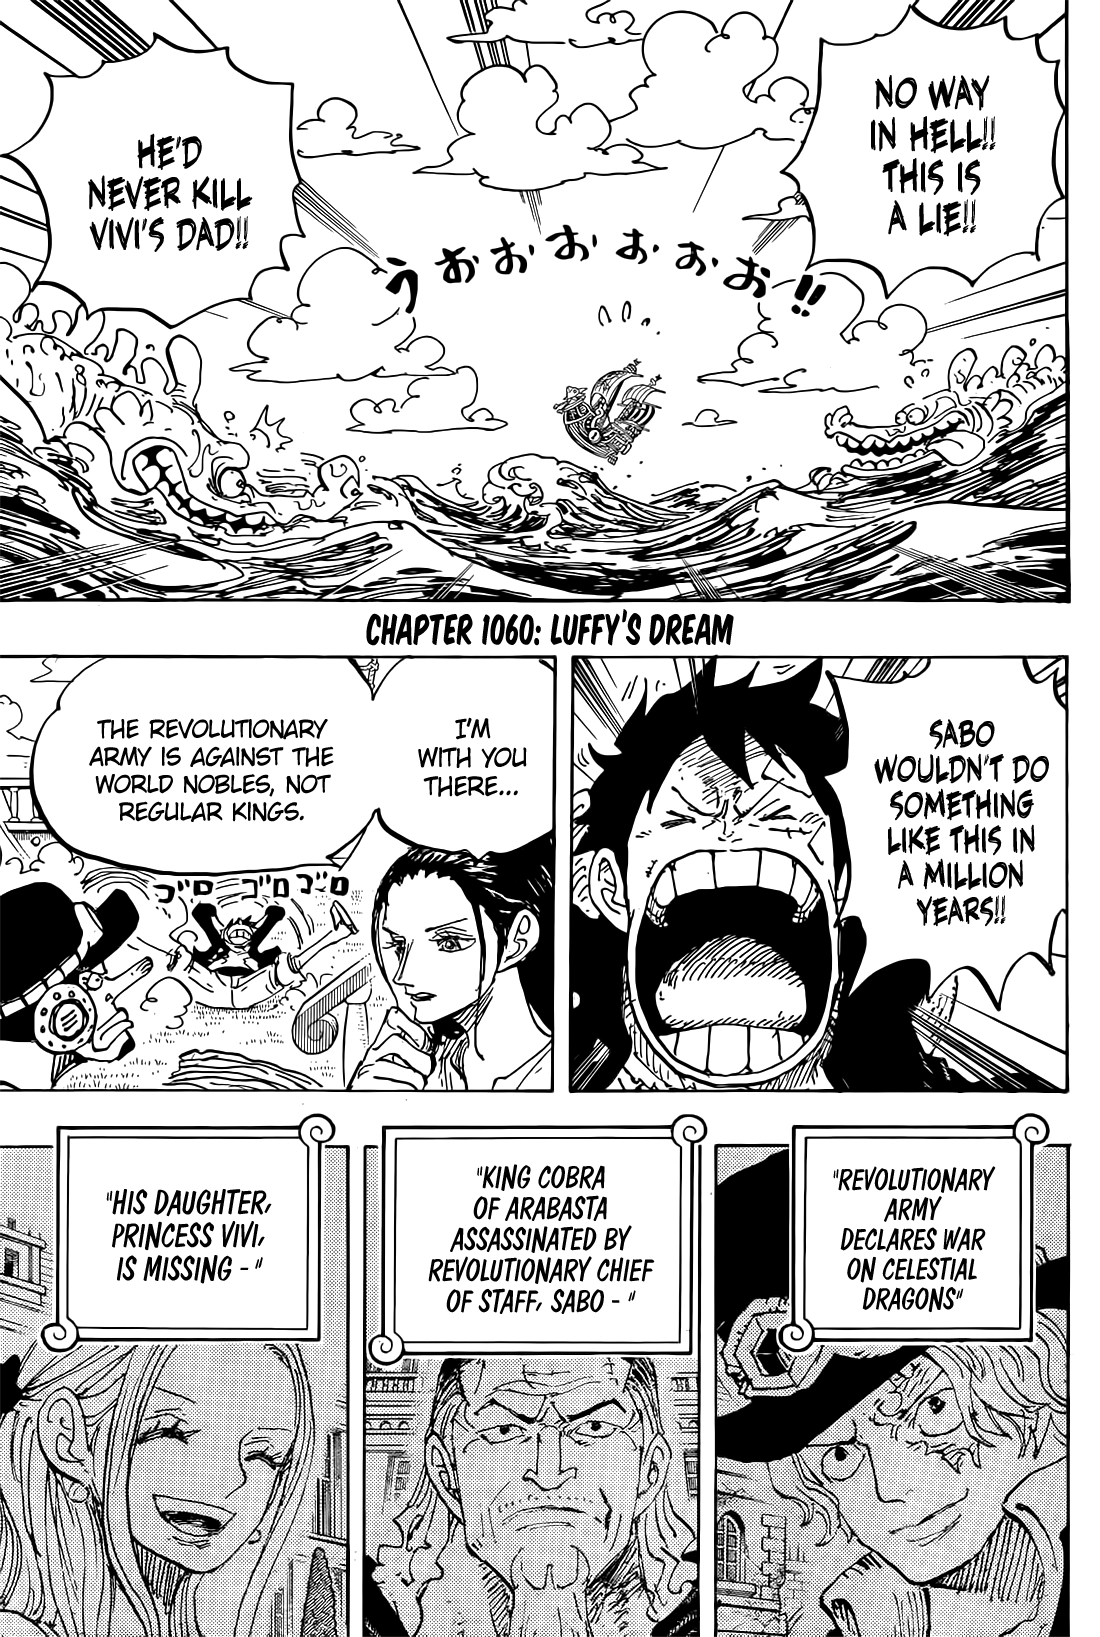 The Evolution of Luffy: A Character Study in One Piece - Tcbscans Online